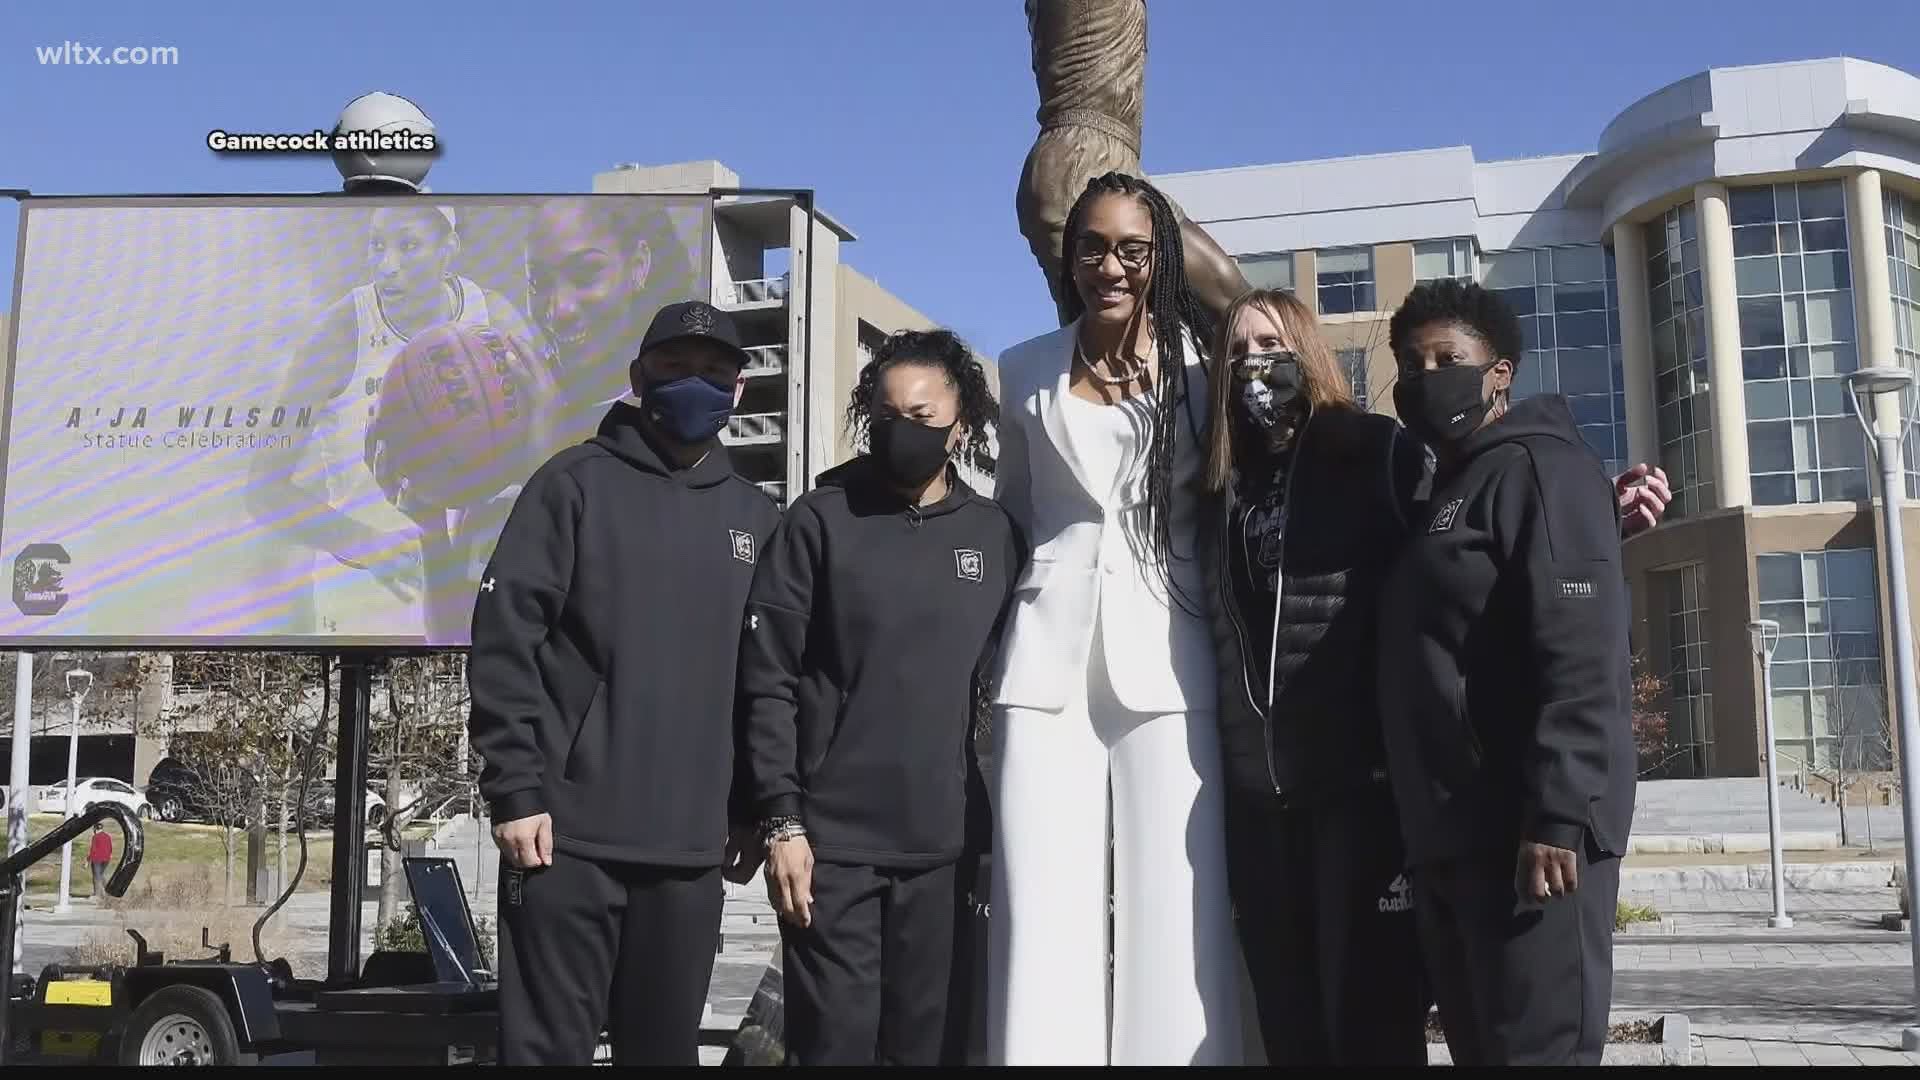 South Carolina Gamecocks legend A'ja Wilson saw her statue for the first time Monday.